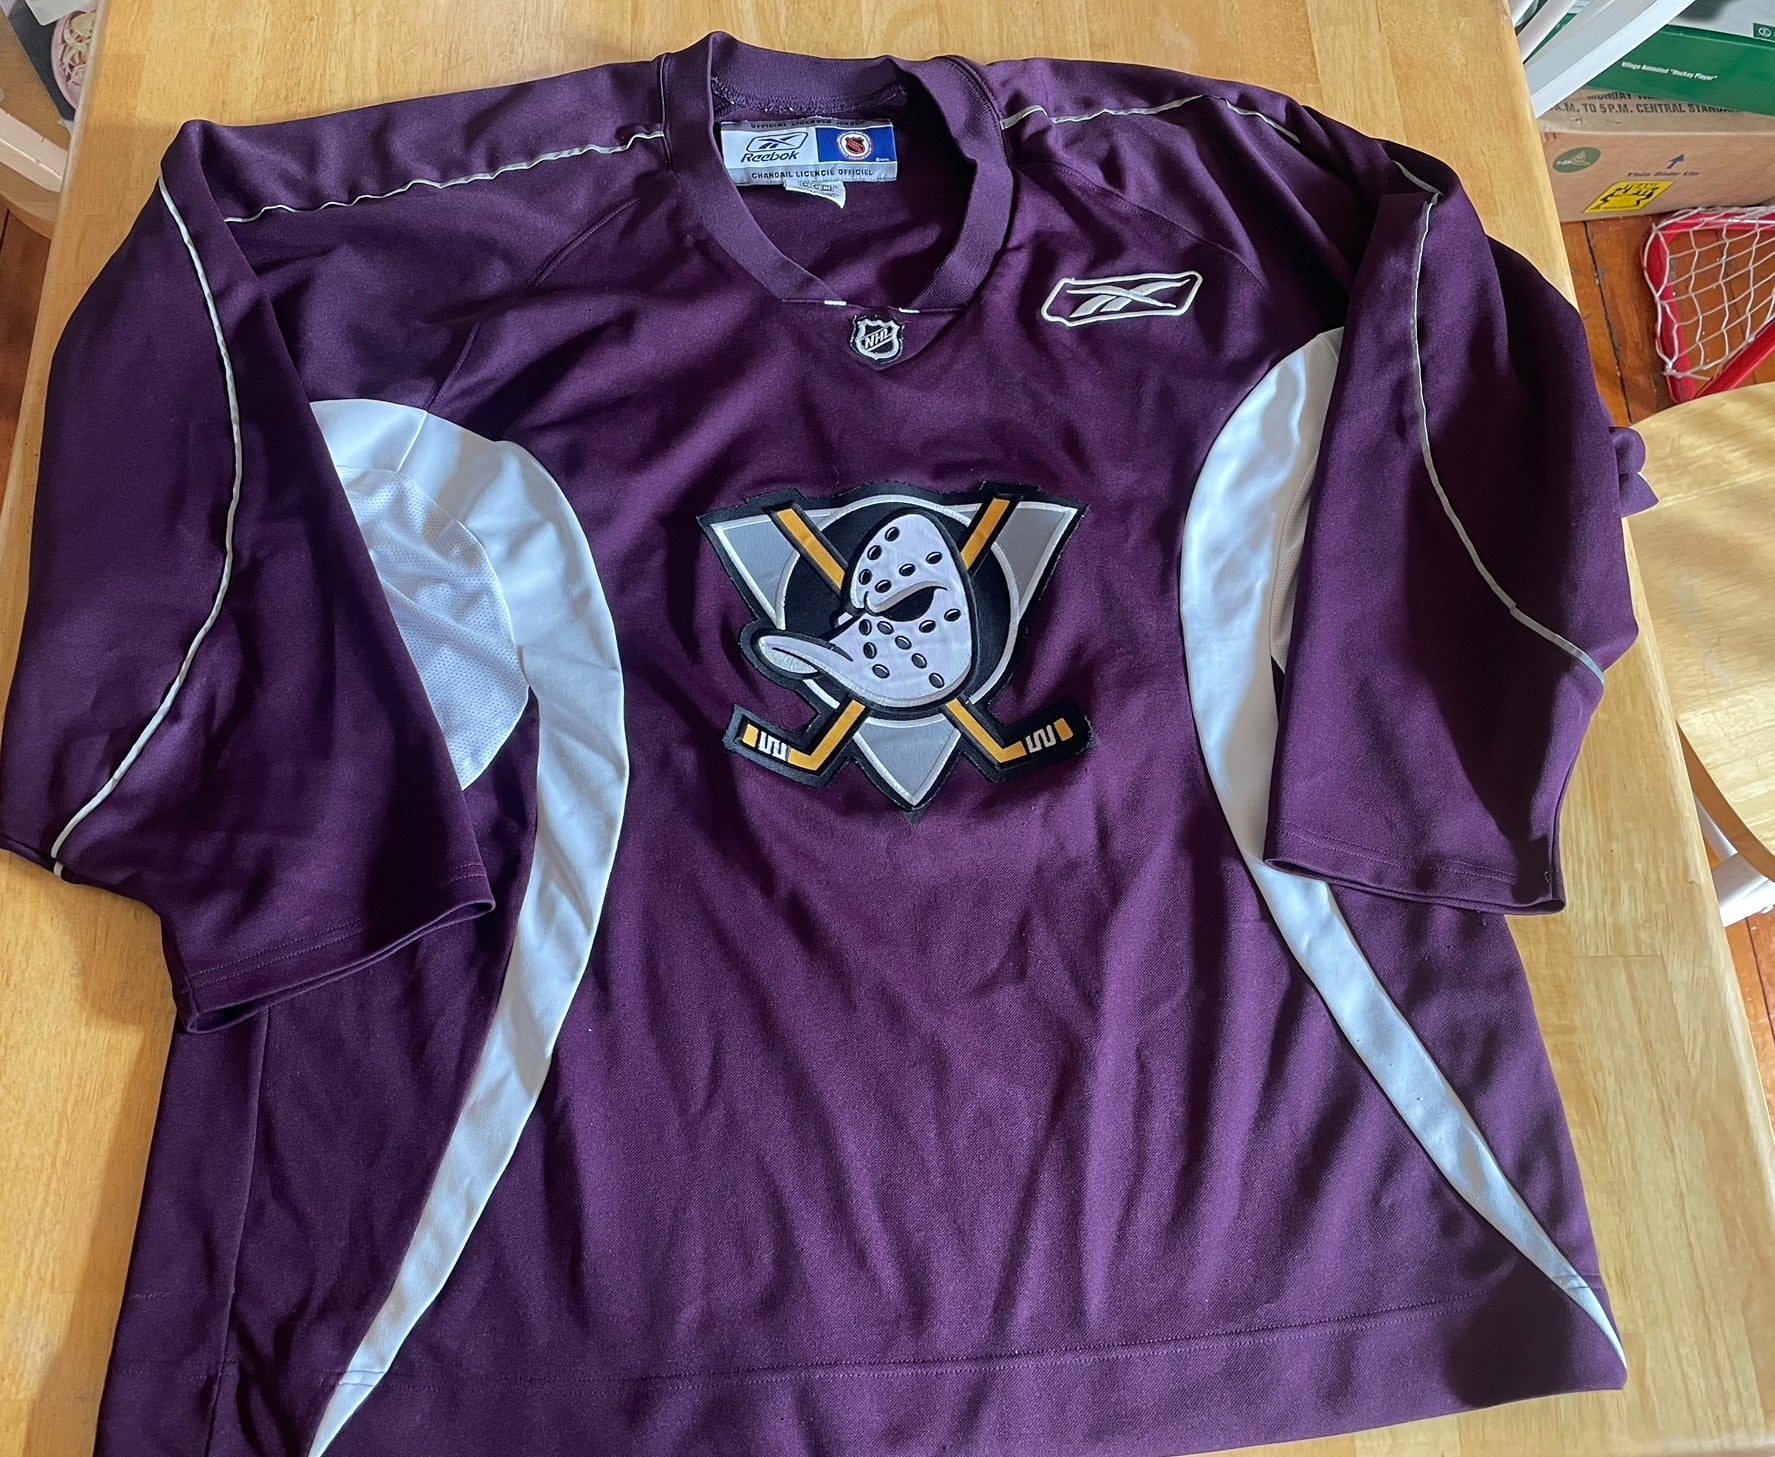 Mighty Ducks District 5 Athletic Knit Hockey Jersey